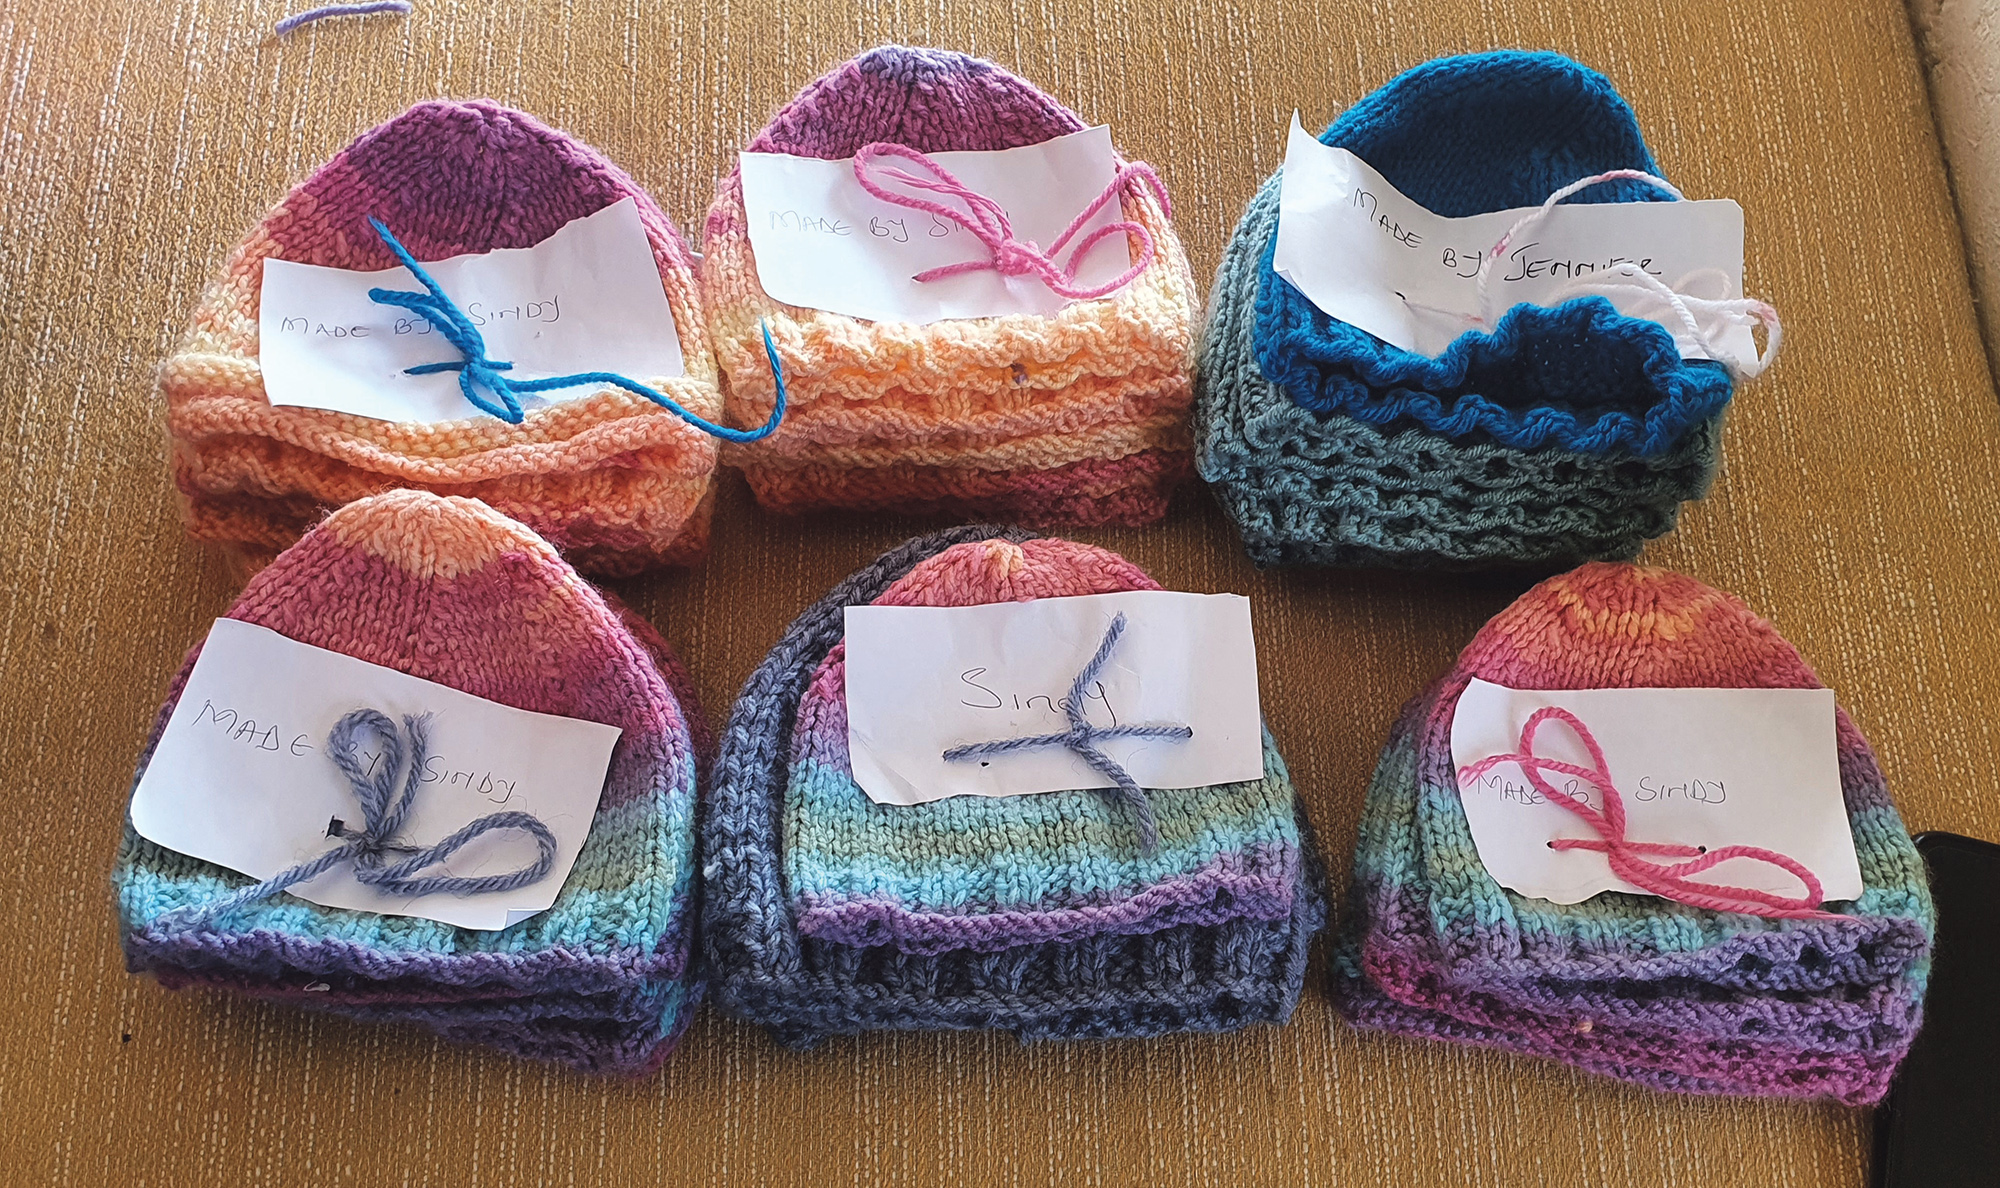 Bonnets that have been knitted for newborns, weaving